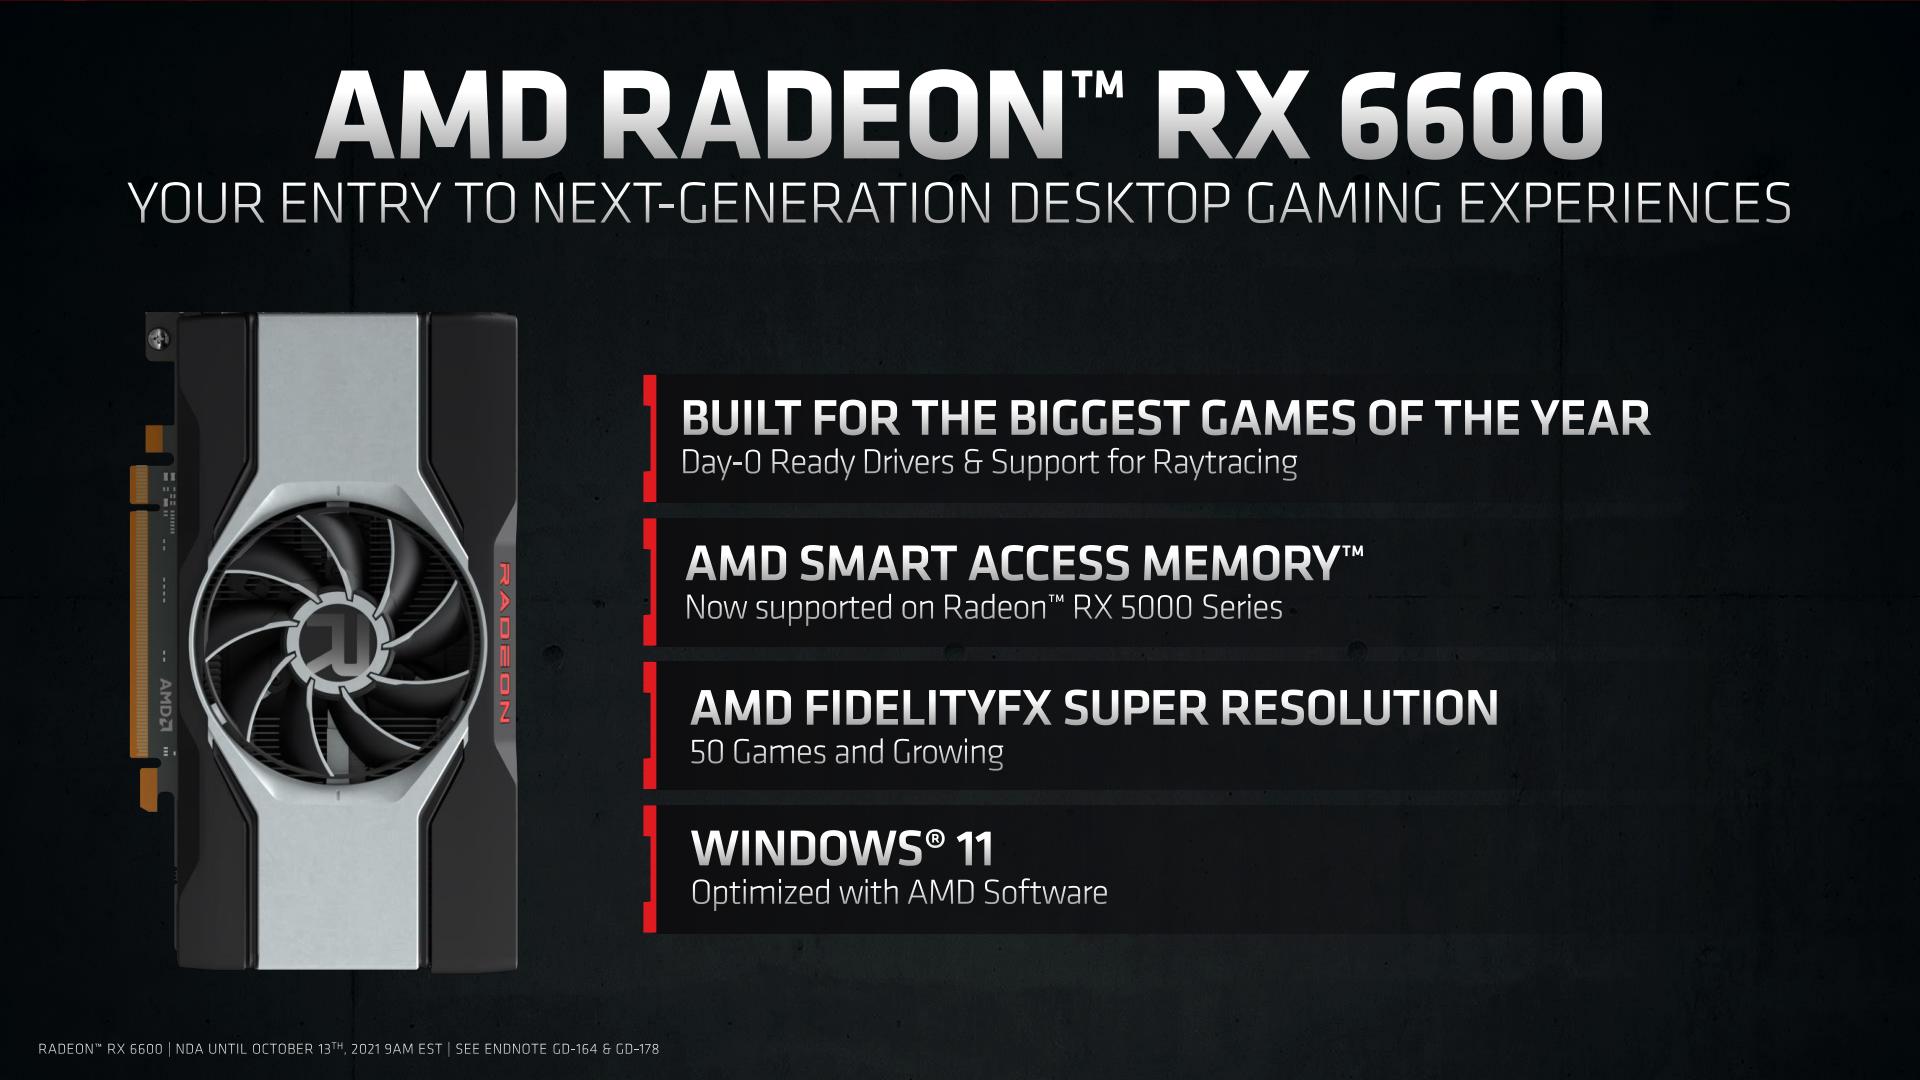 AMD RX 6600 XT gets discounted to never heard of price this Black